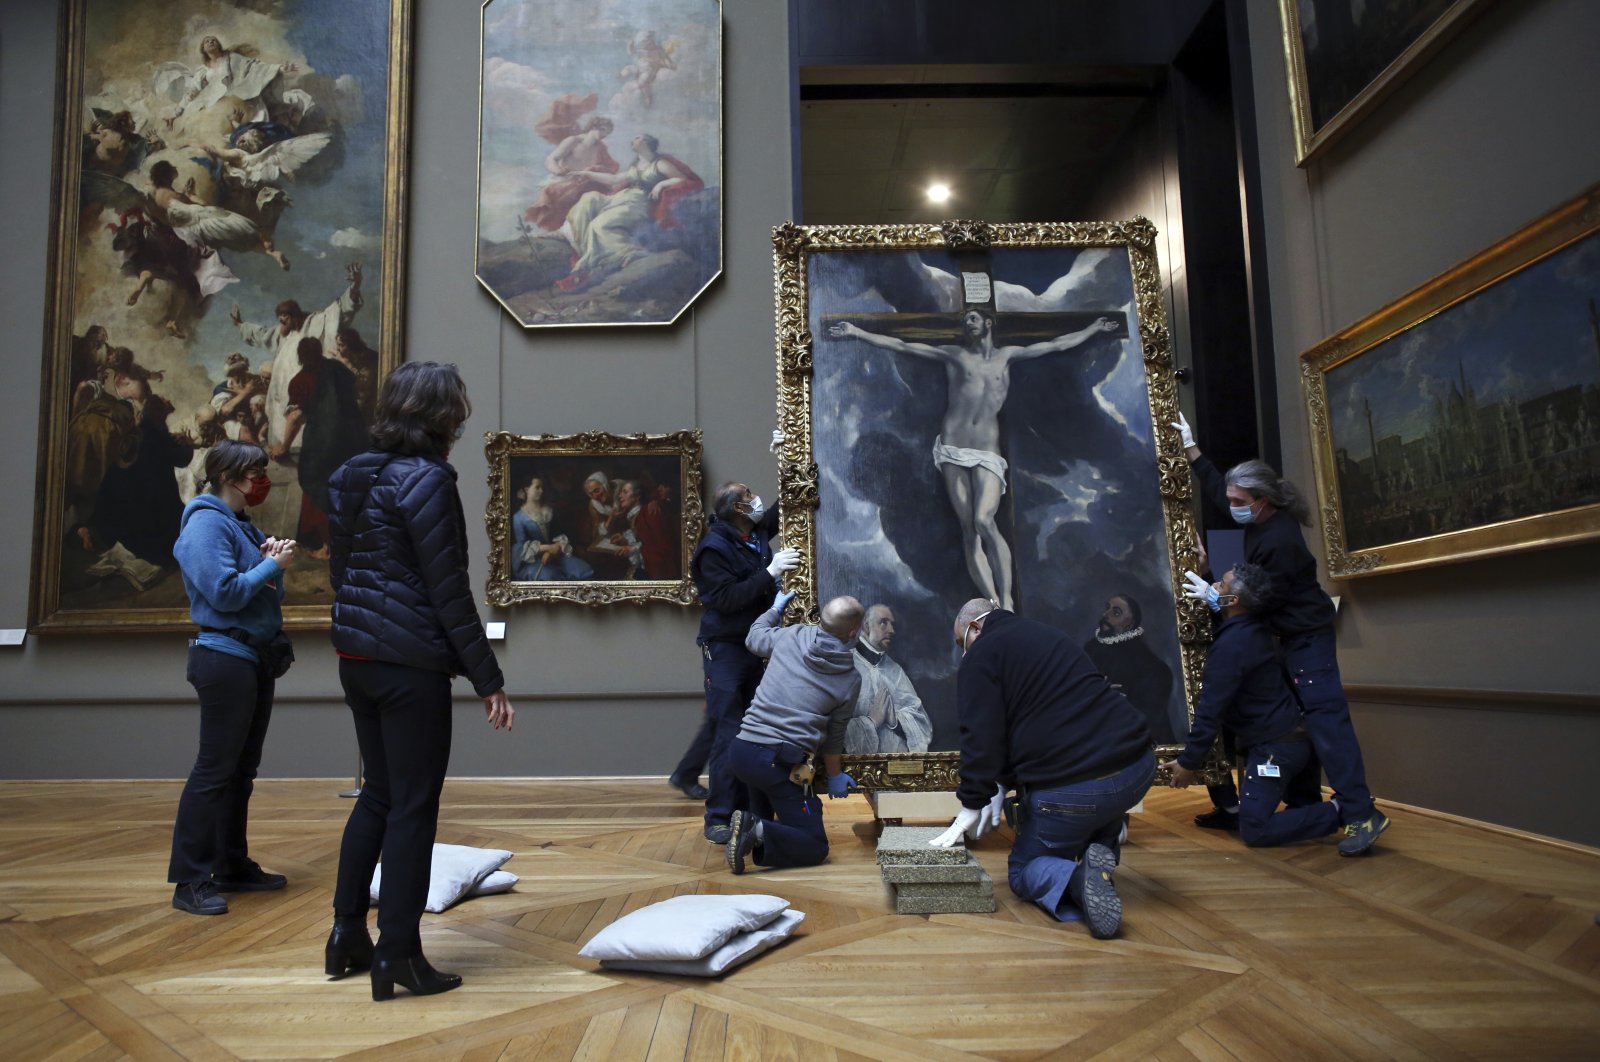 Workers handle a painting called 'Christ on the Cross Adored by Two Donors' by Spanish painter El Greco, as it returns from an exhibition at the Chicago Institute, in the Louvre museum, in Paris, Feb. 9, 2021. (AP Photo)